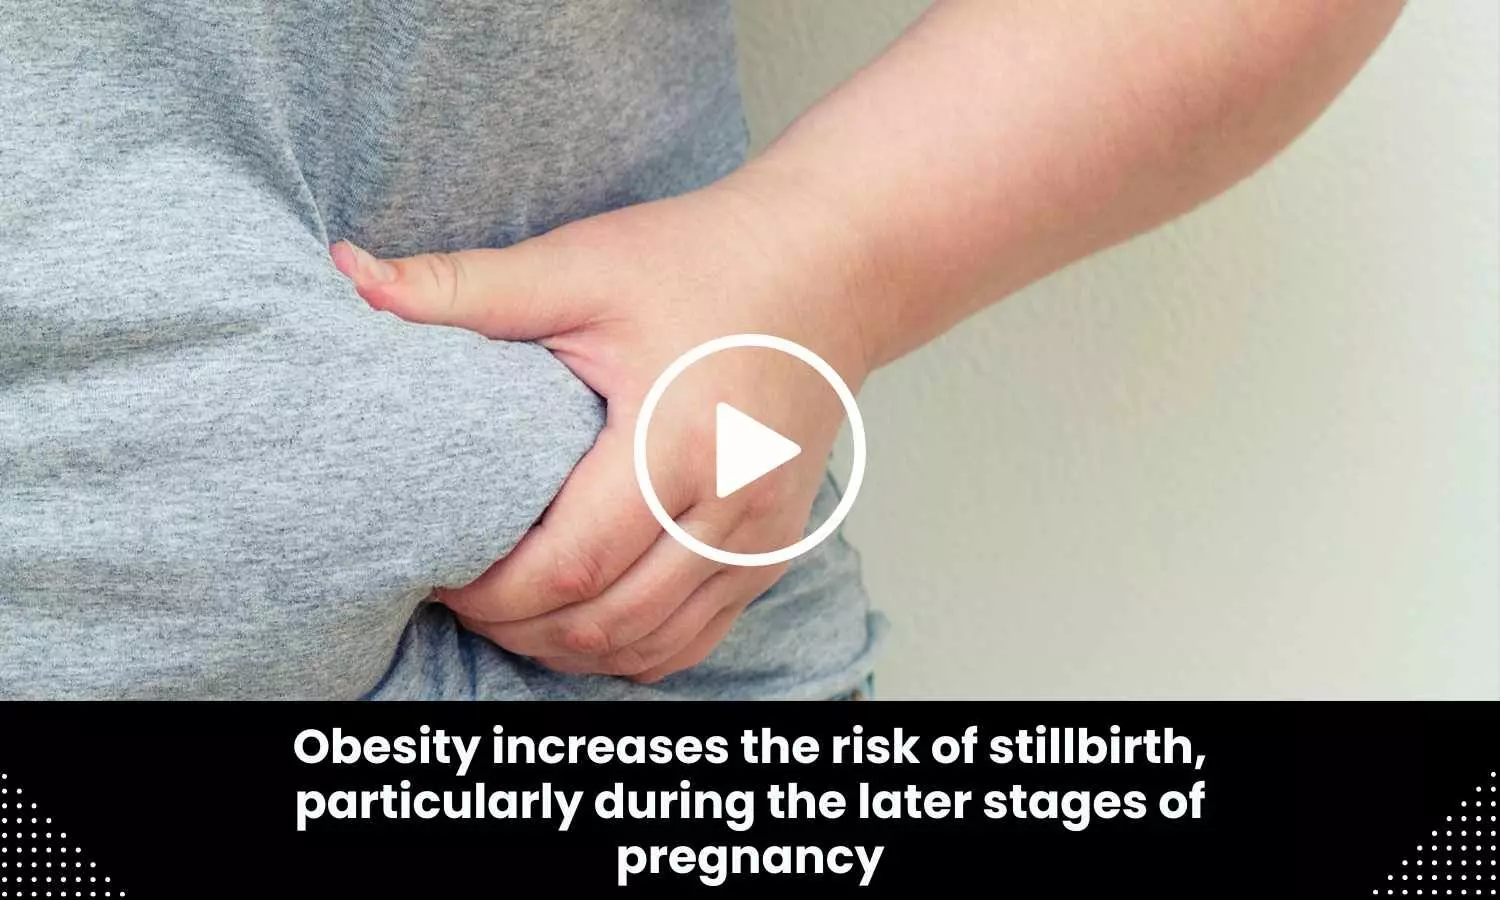 Obesity increases the risk of stillbirth, particularly during the later stages of pregnancy